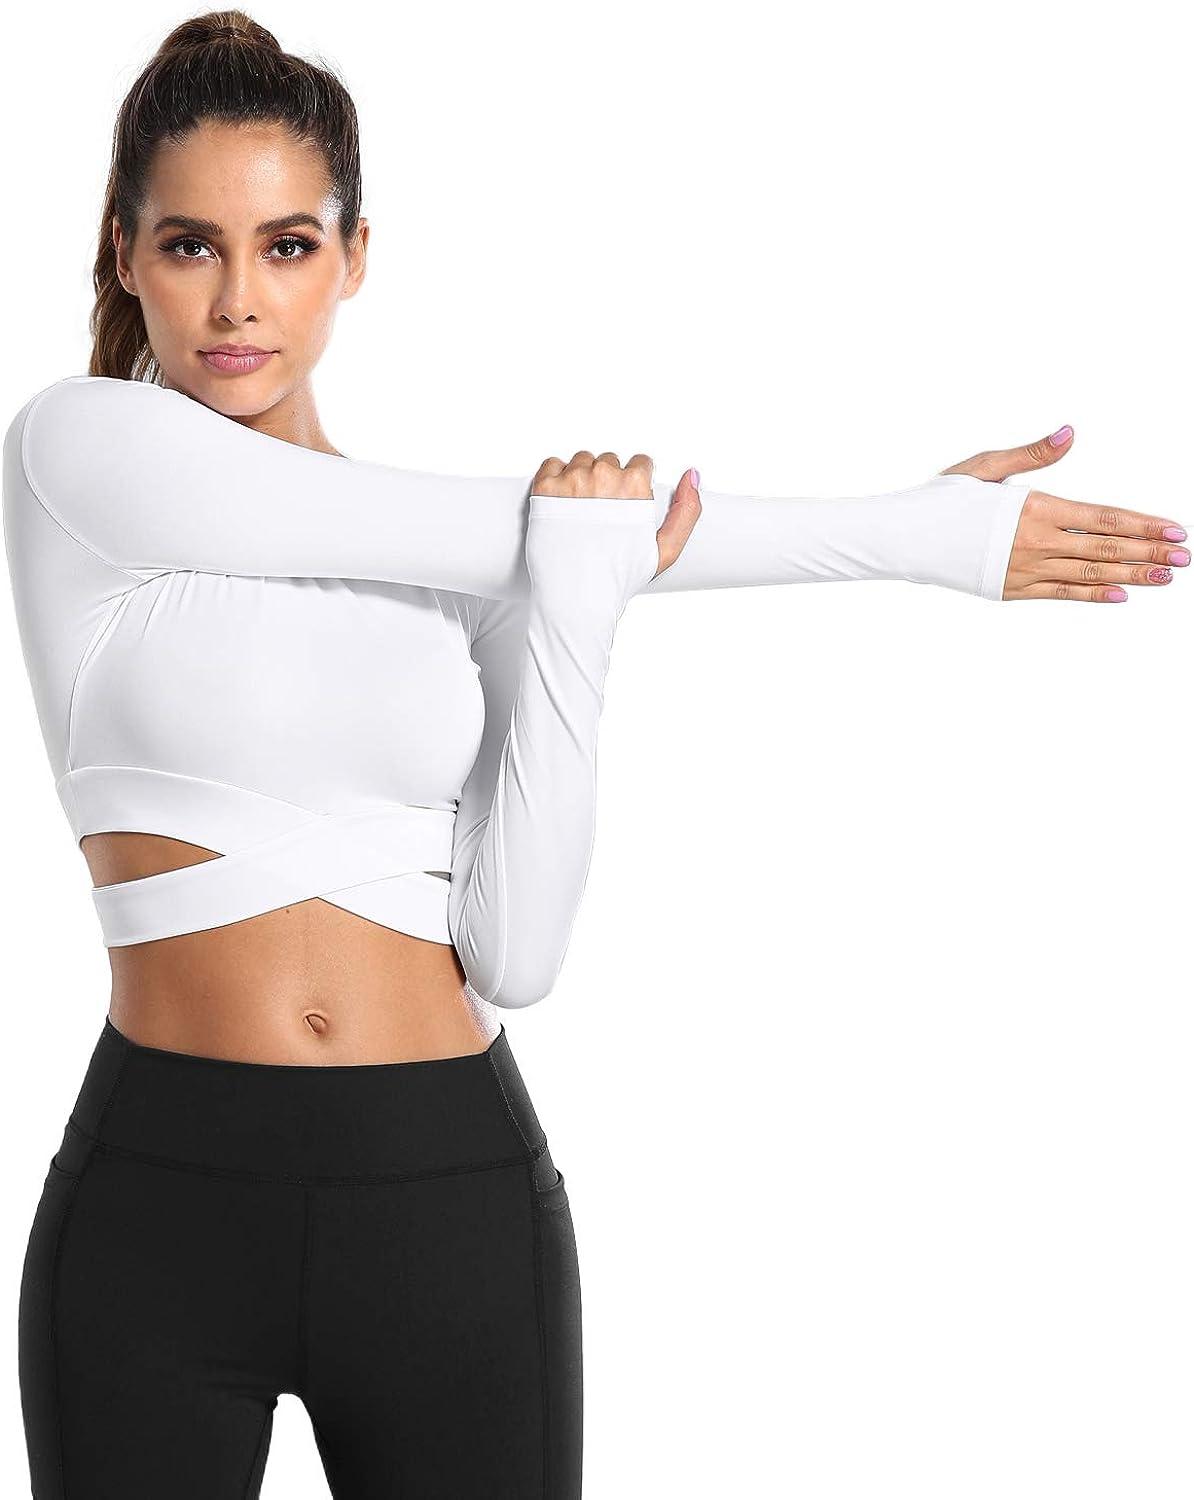 DREAM SLIM Short Sleeve Crop Tops for Women Tummy Cross Fitted Yoga Running  Shirts Gym Workout Cropped Tank Tops White Long Small